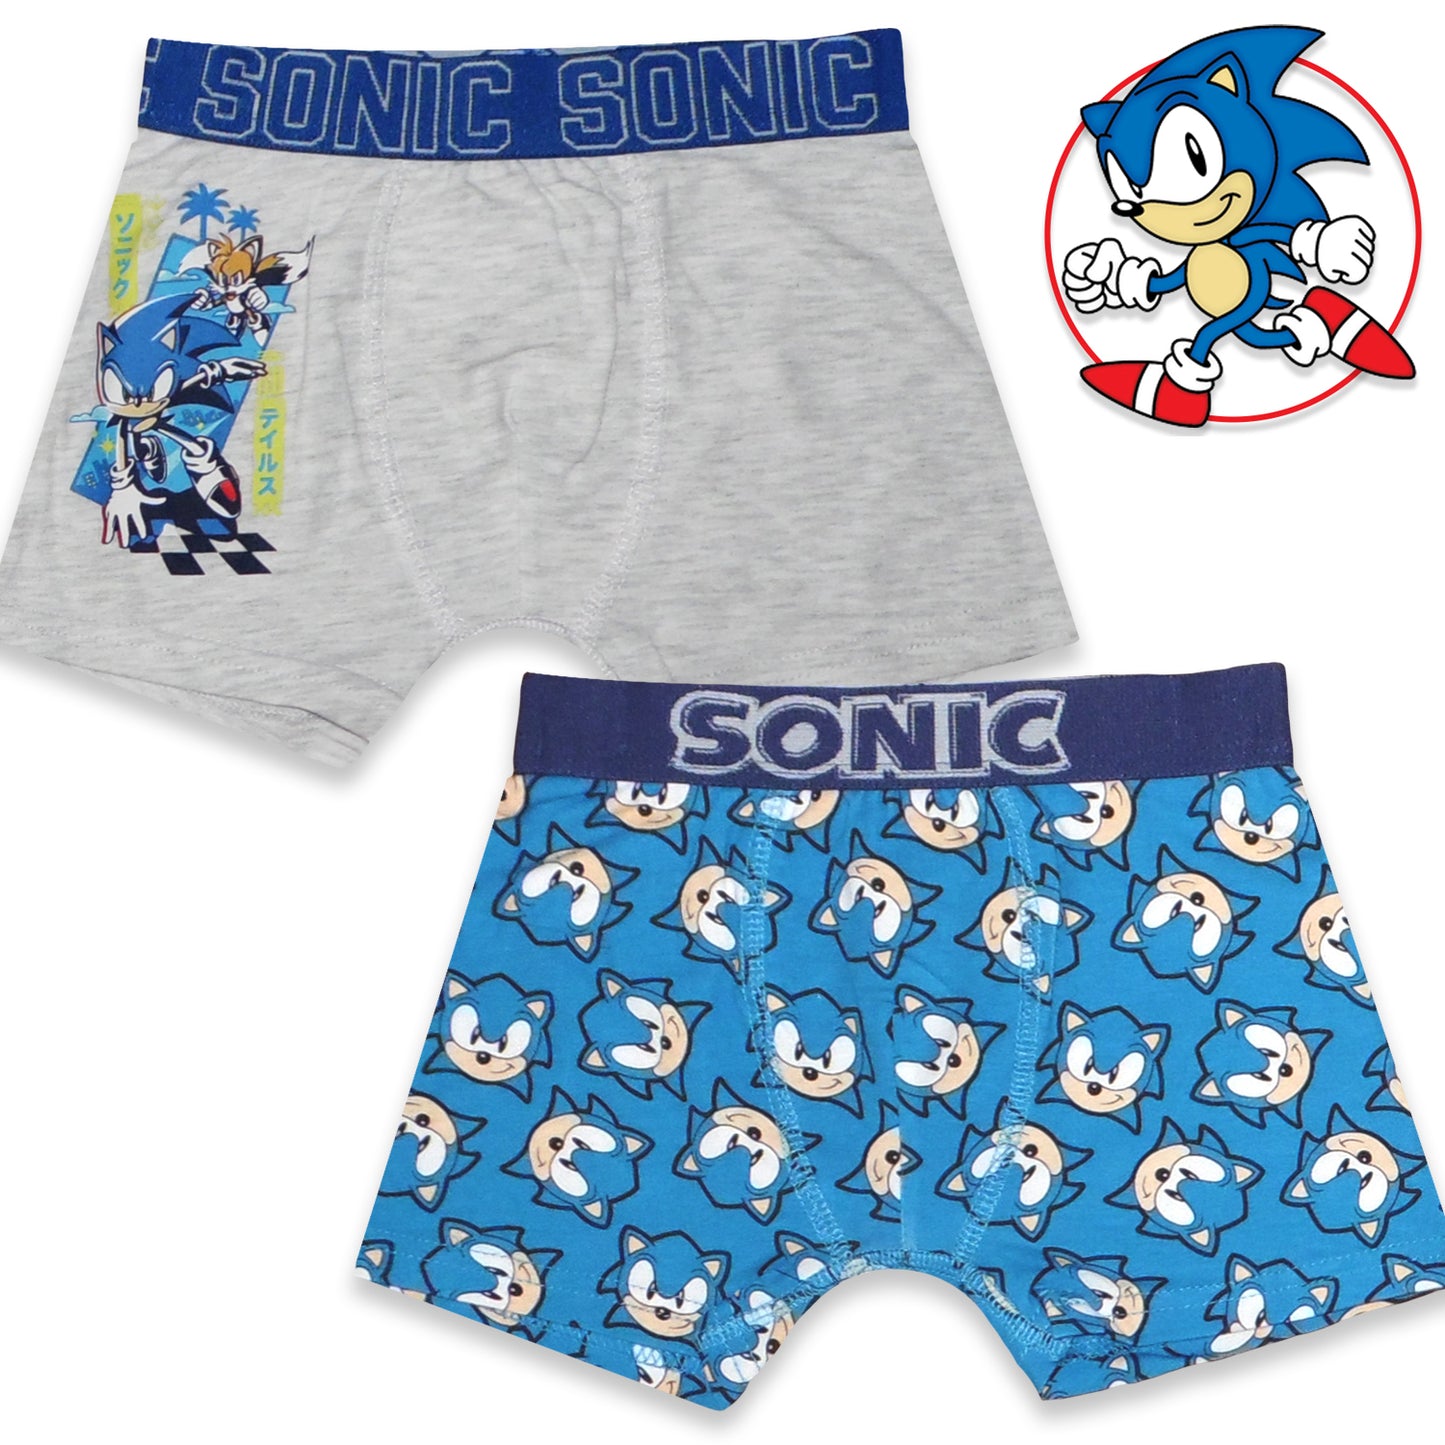 SONIC the Hedgehog Cotton Underwear for Kids, Pack of 2